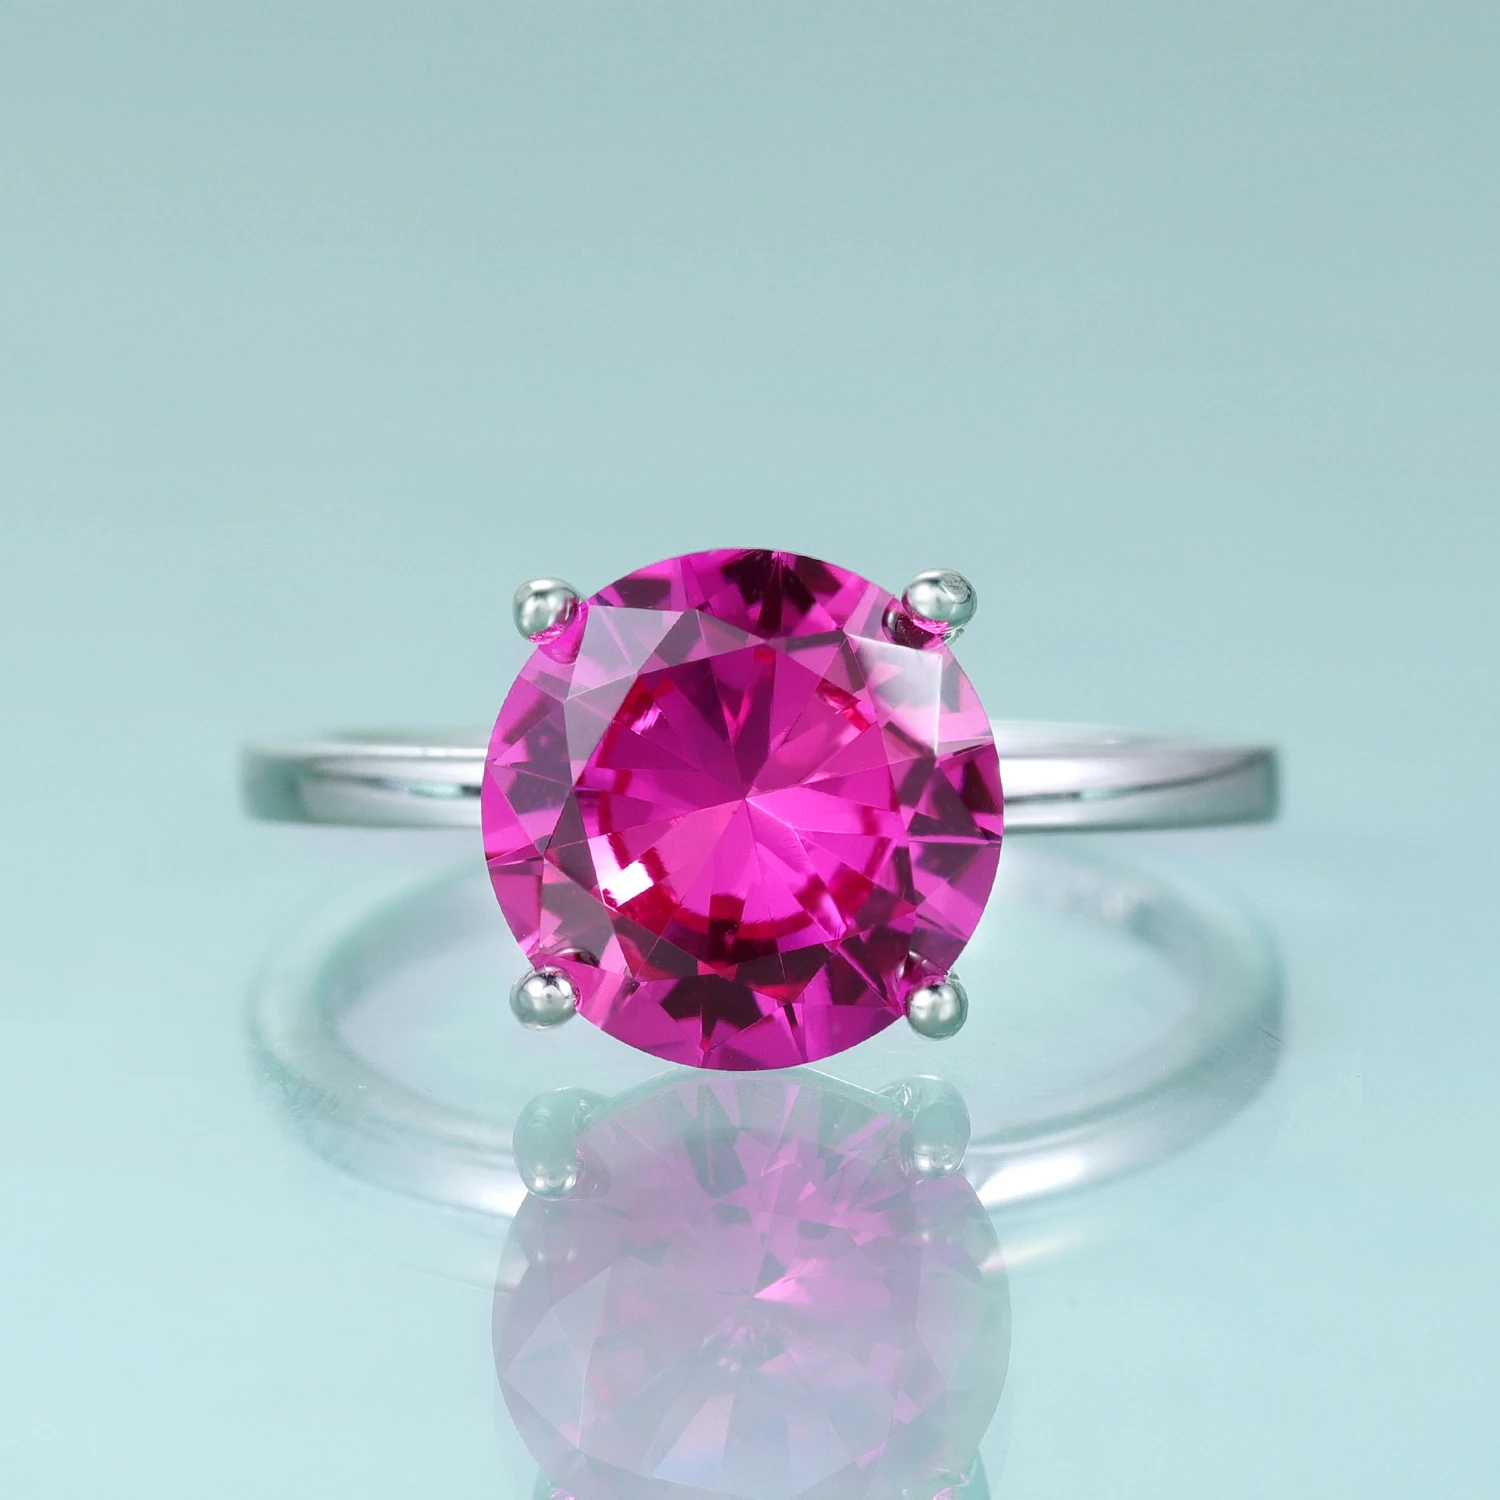 Luxury Marquise Cut 4 Carat Pink Stone Pink Diamond Wedding Ring For Women  And Men 3 Styles Available With S925 Logo And Real 925 Silver Rings From  Fashion7house, $12.64 | DHgate.Com